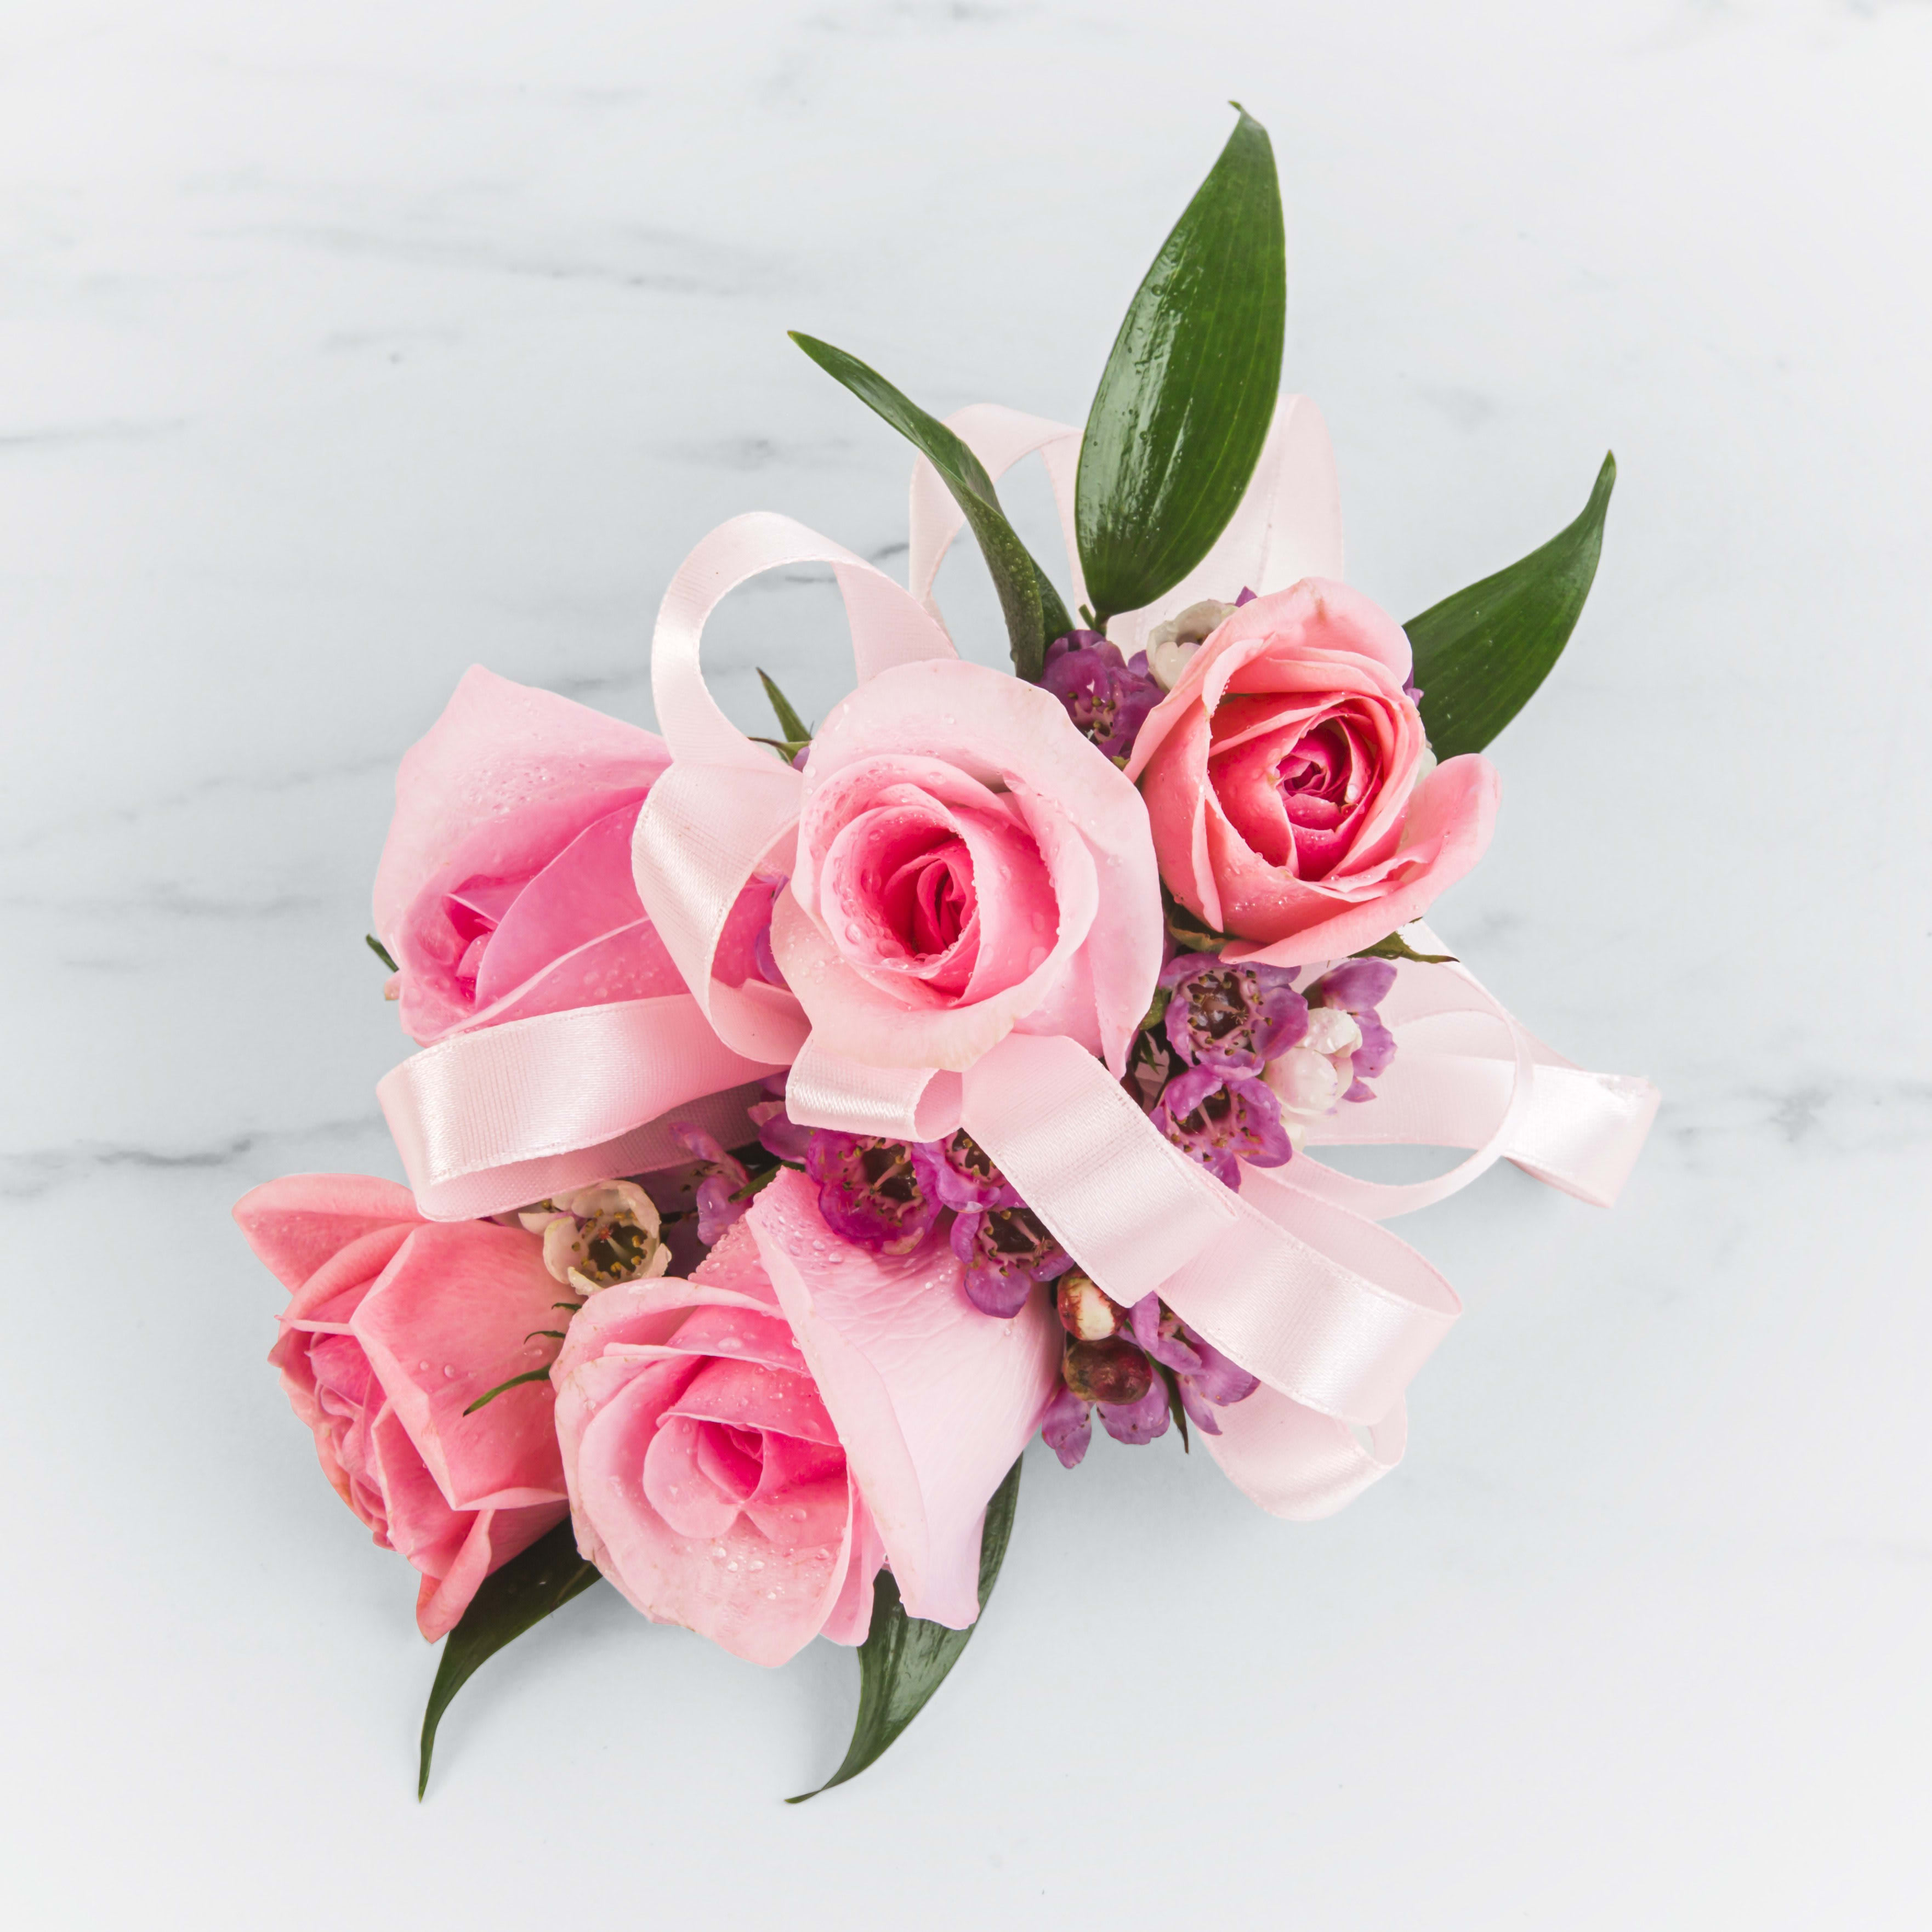 Pink Rose Corsage by BloomNation™  - A classic pink corsage hand-tied in pink satin that compliments any outfit. A beautiful addition to any prom, formal, or wedding event. 